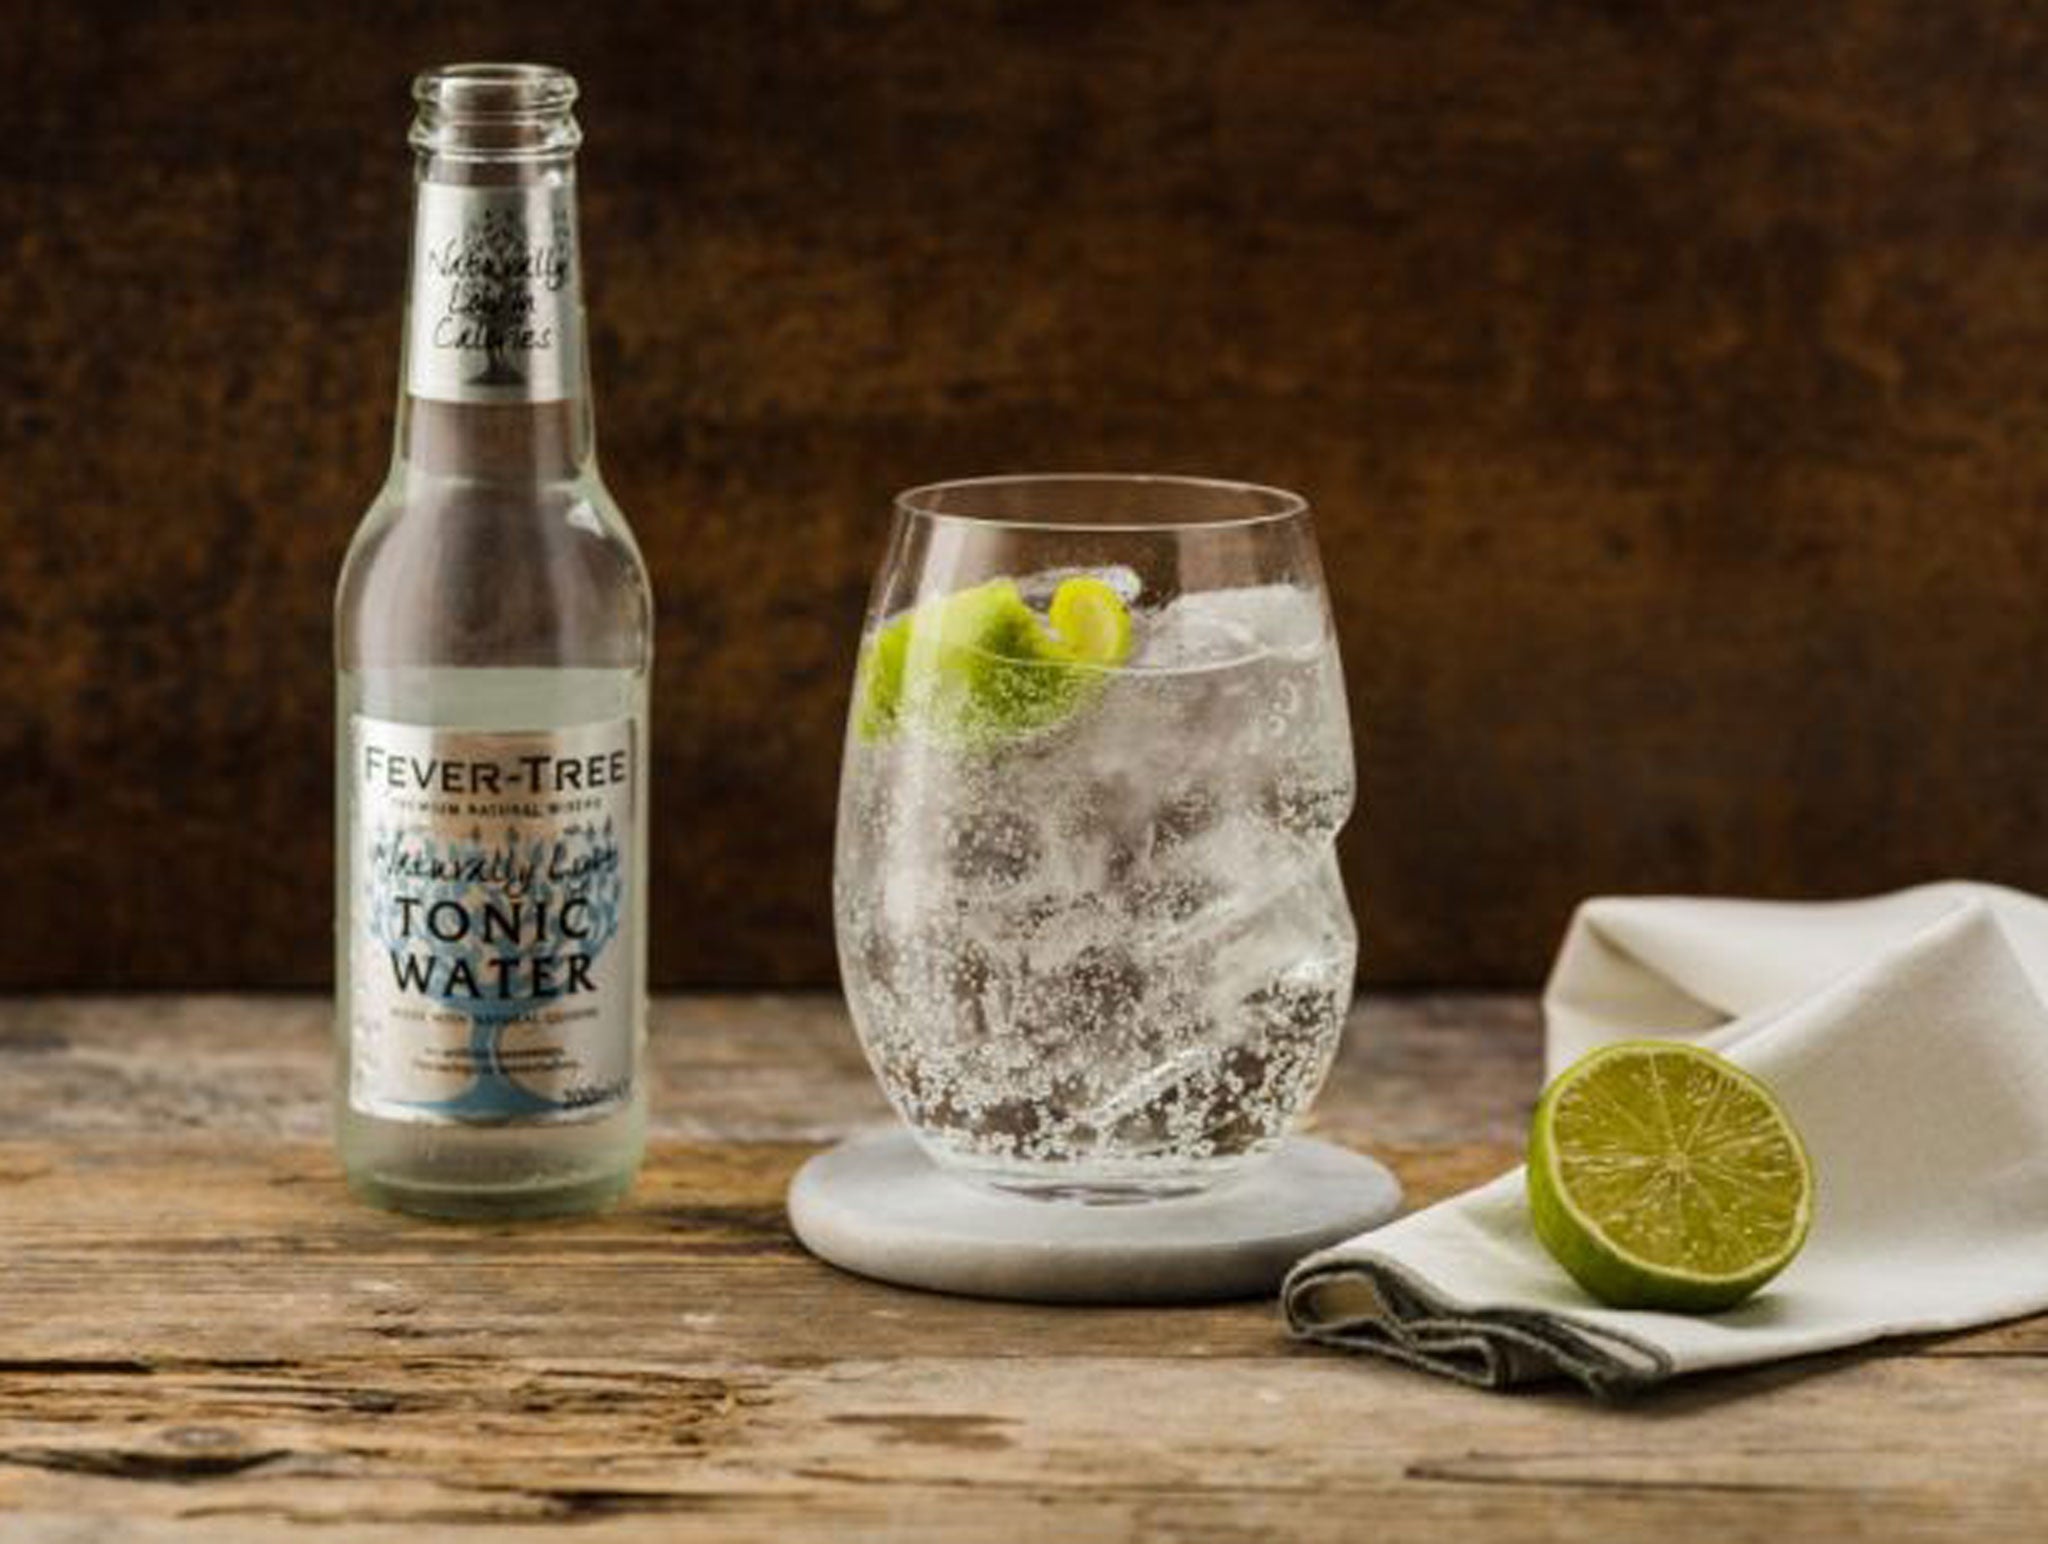 Fever-Tree was set up to offer premium tonic water with no artificial sweeteners, preservatives or flavourings